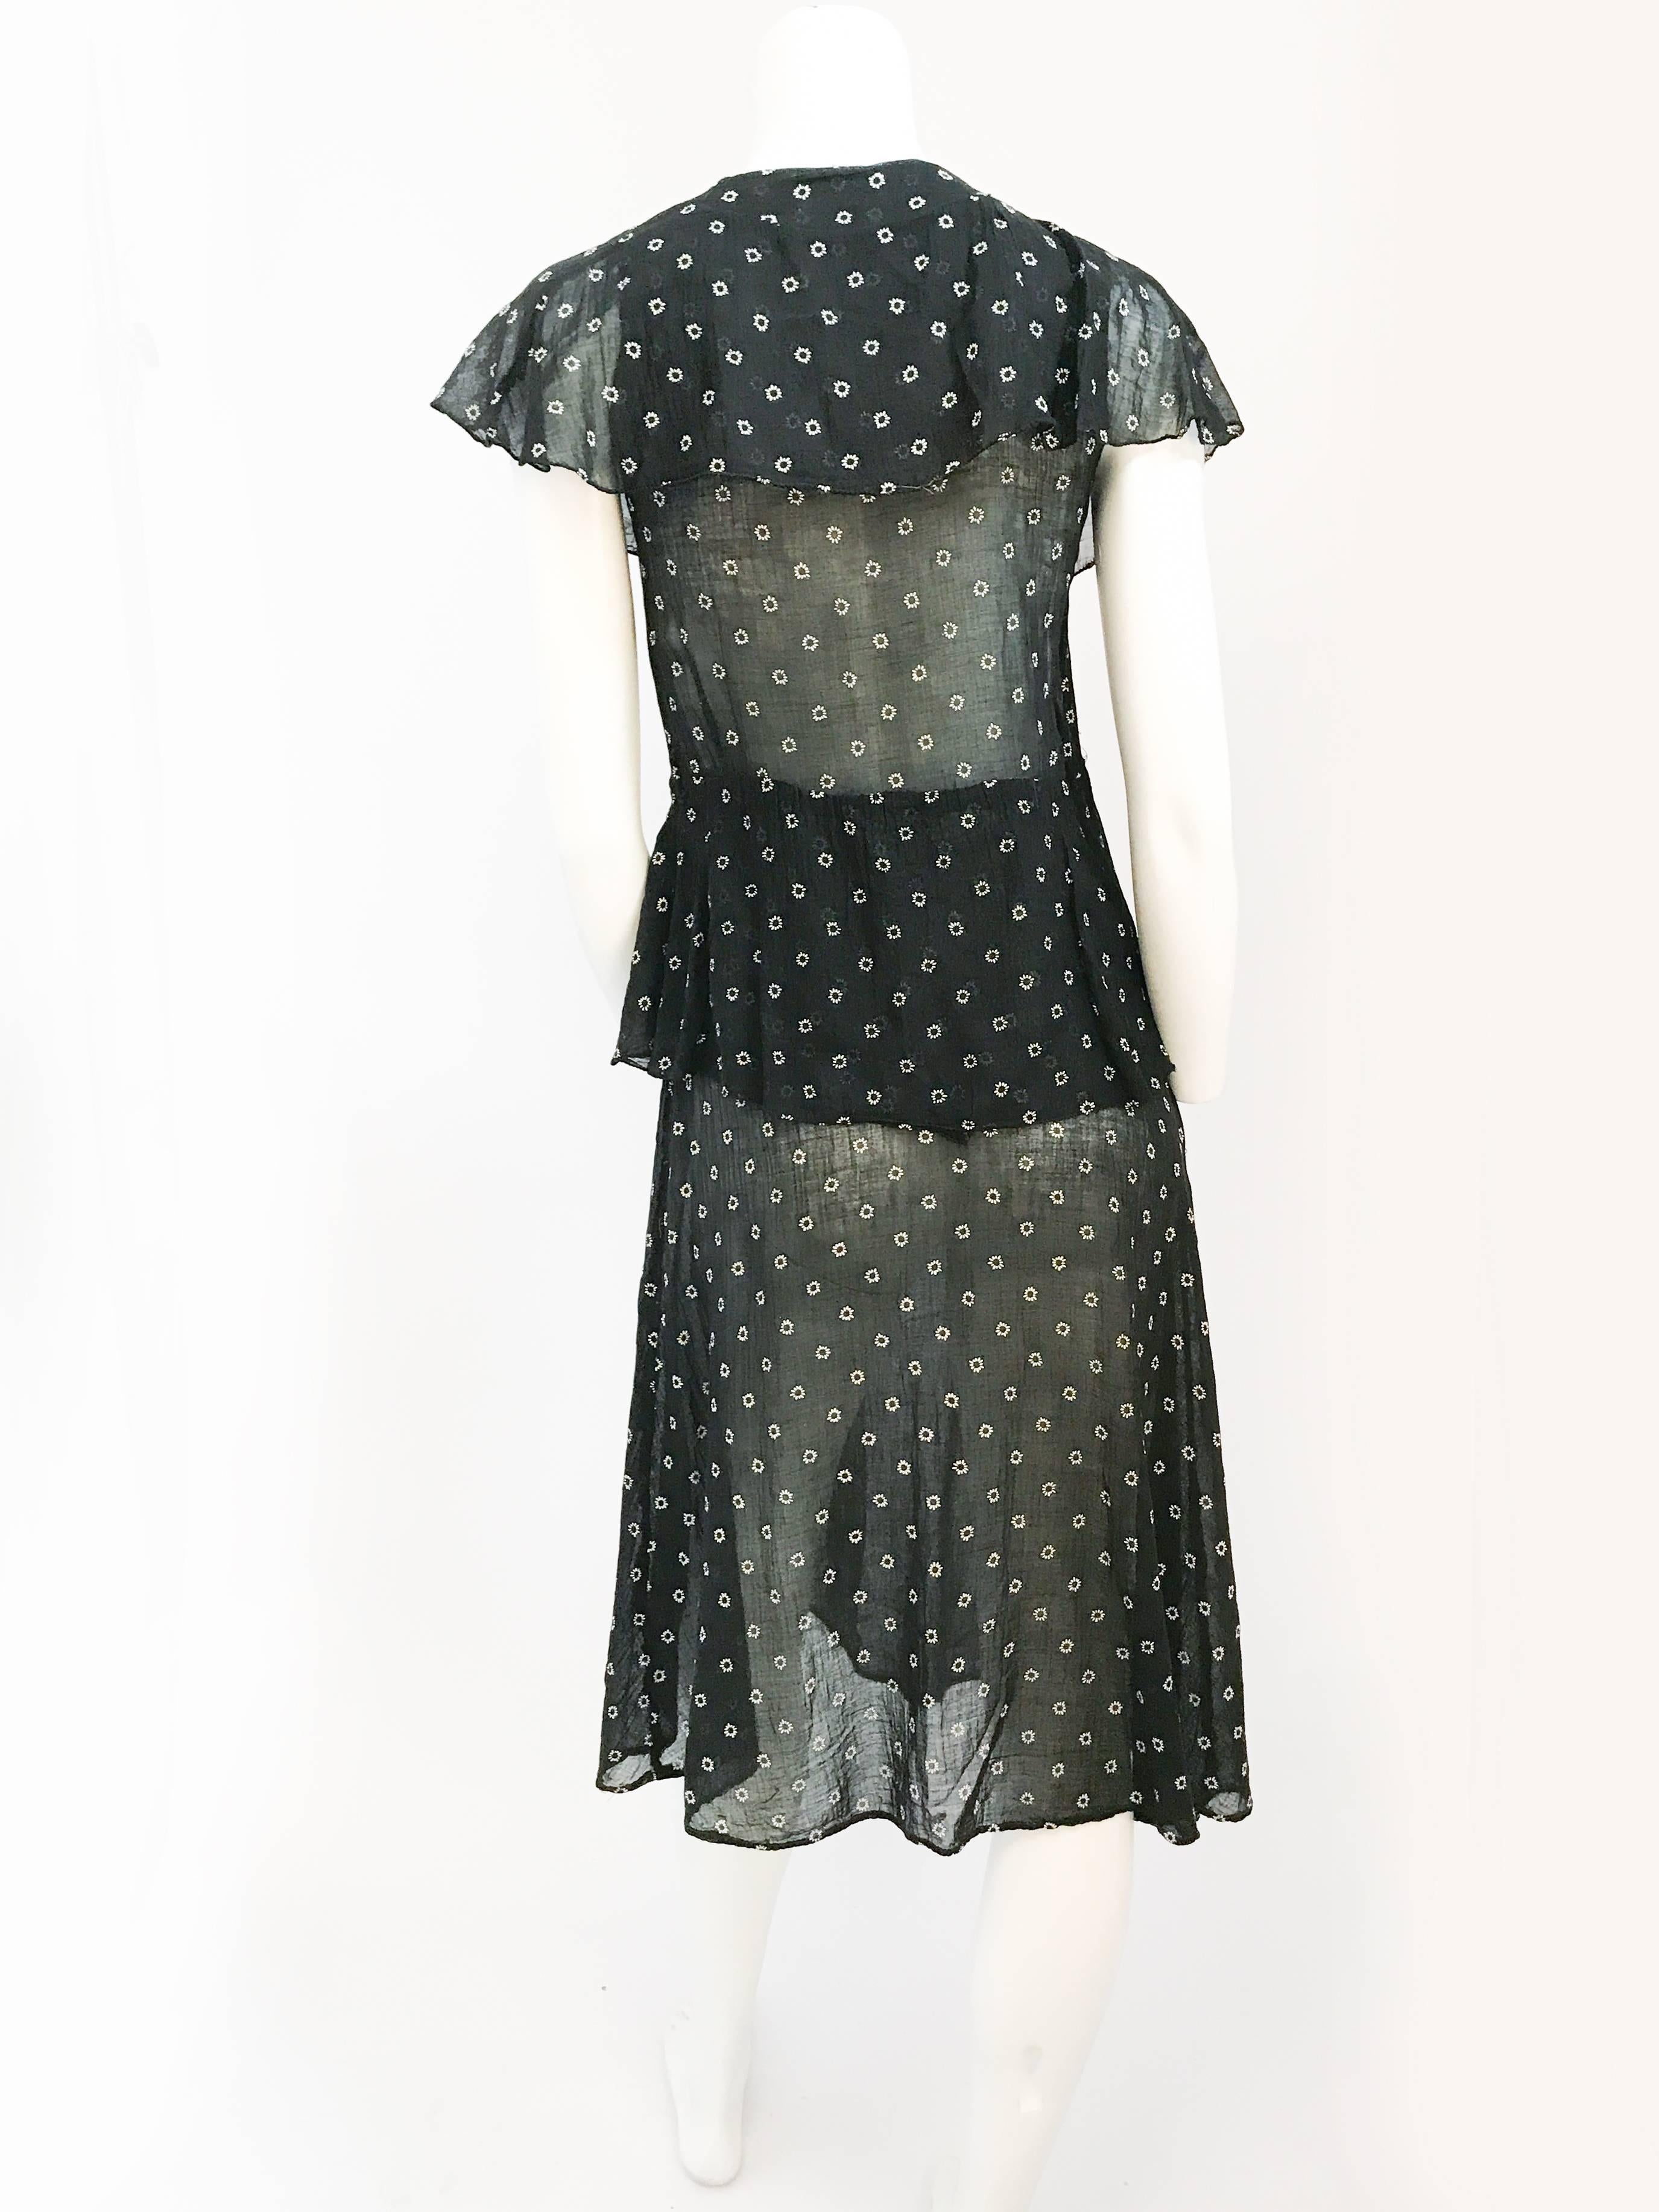 1920 Black Cotton Day Dress In Good Condition For Sale In San Francisco, CA